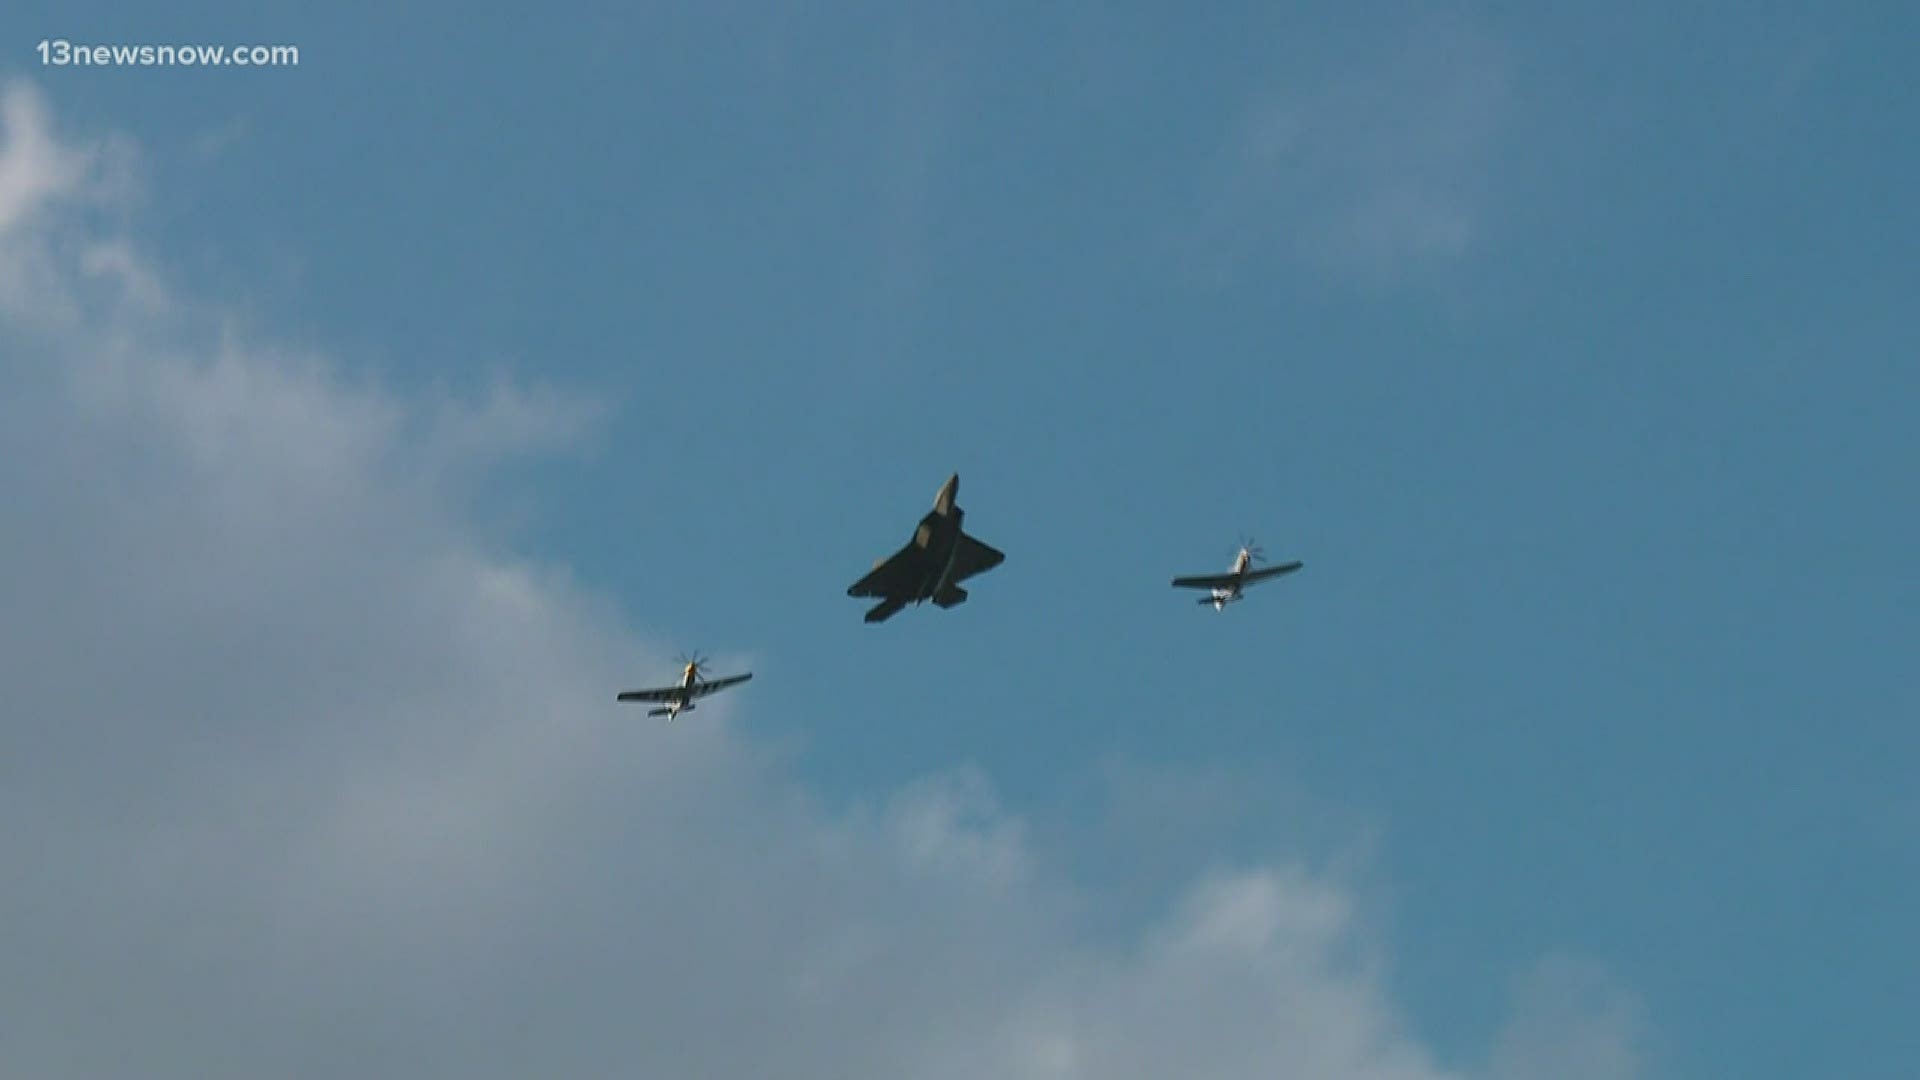 The F-22 Raptor Demo Team honored coronavirus frontline workers and healthcare workers with a flyover in Hampton Roads.